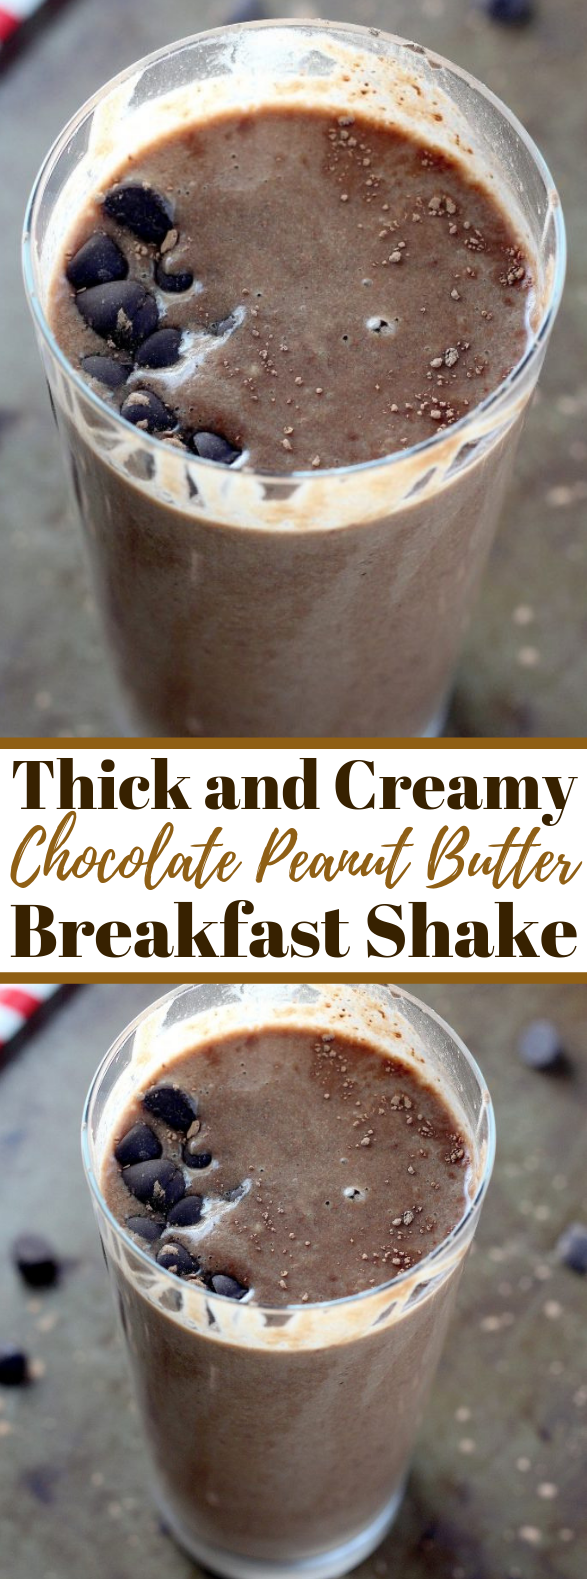 Thick and Creamy Chocolate Peanut Butter Breakfast Shake #healthydrink #smoothie